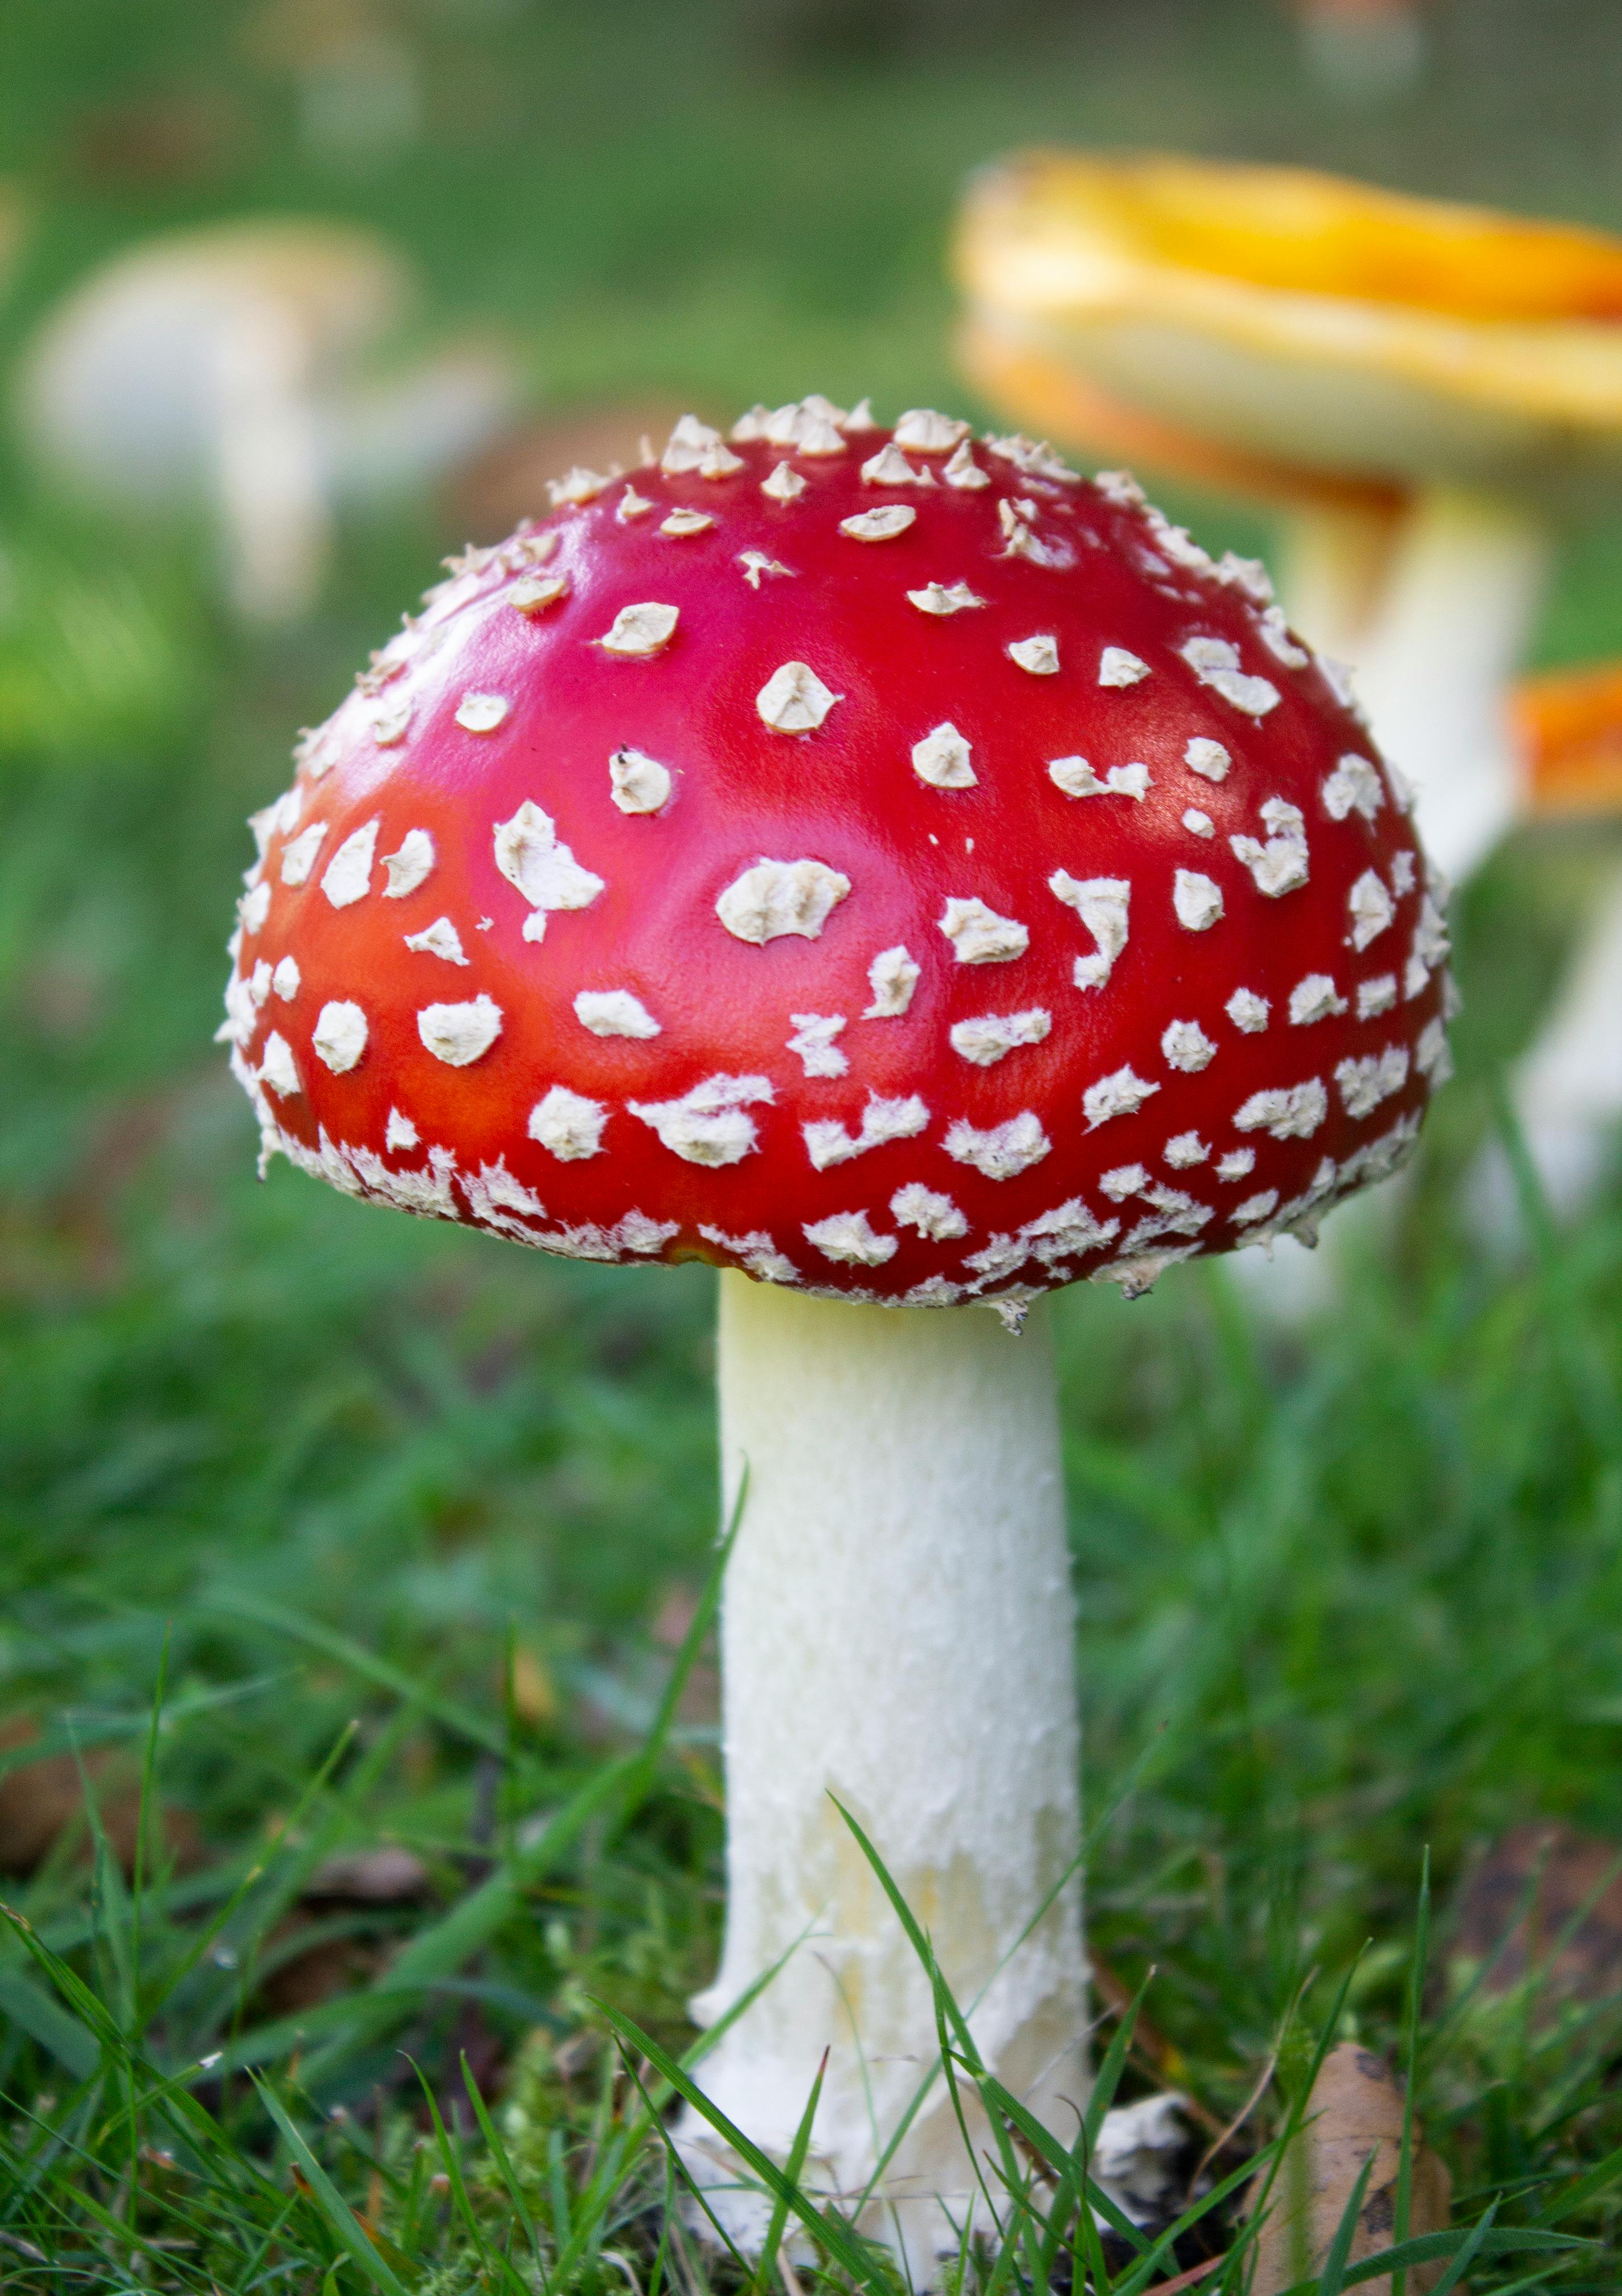 Red and White Mushroom on Green Grass · Free Stock Photo